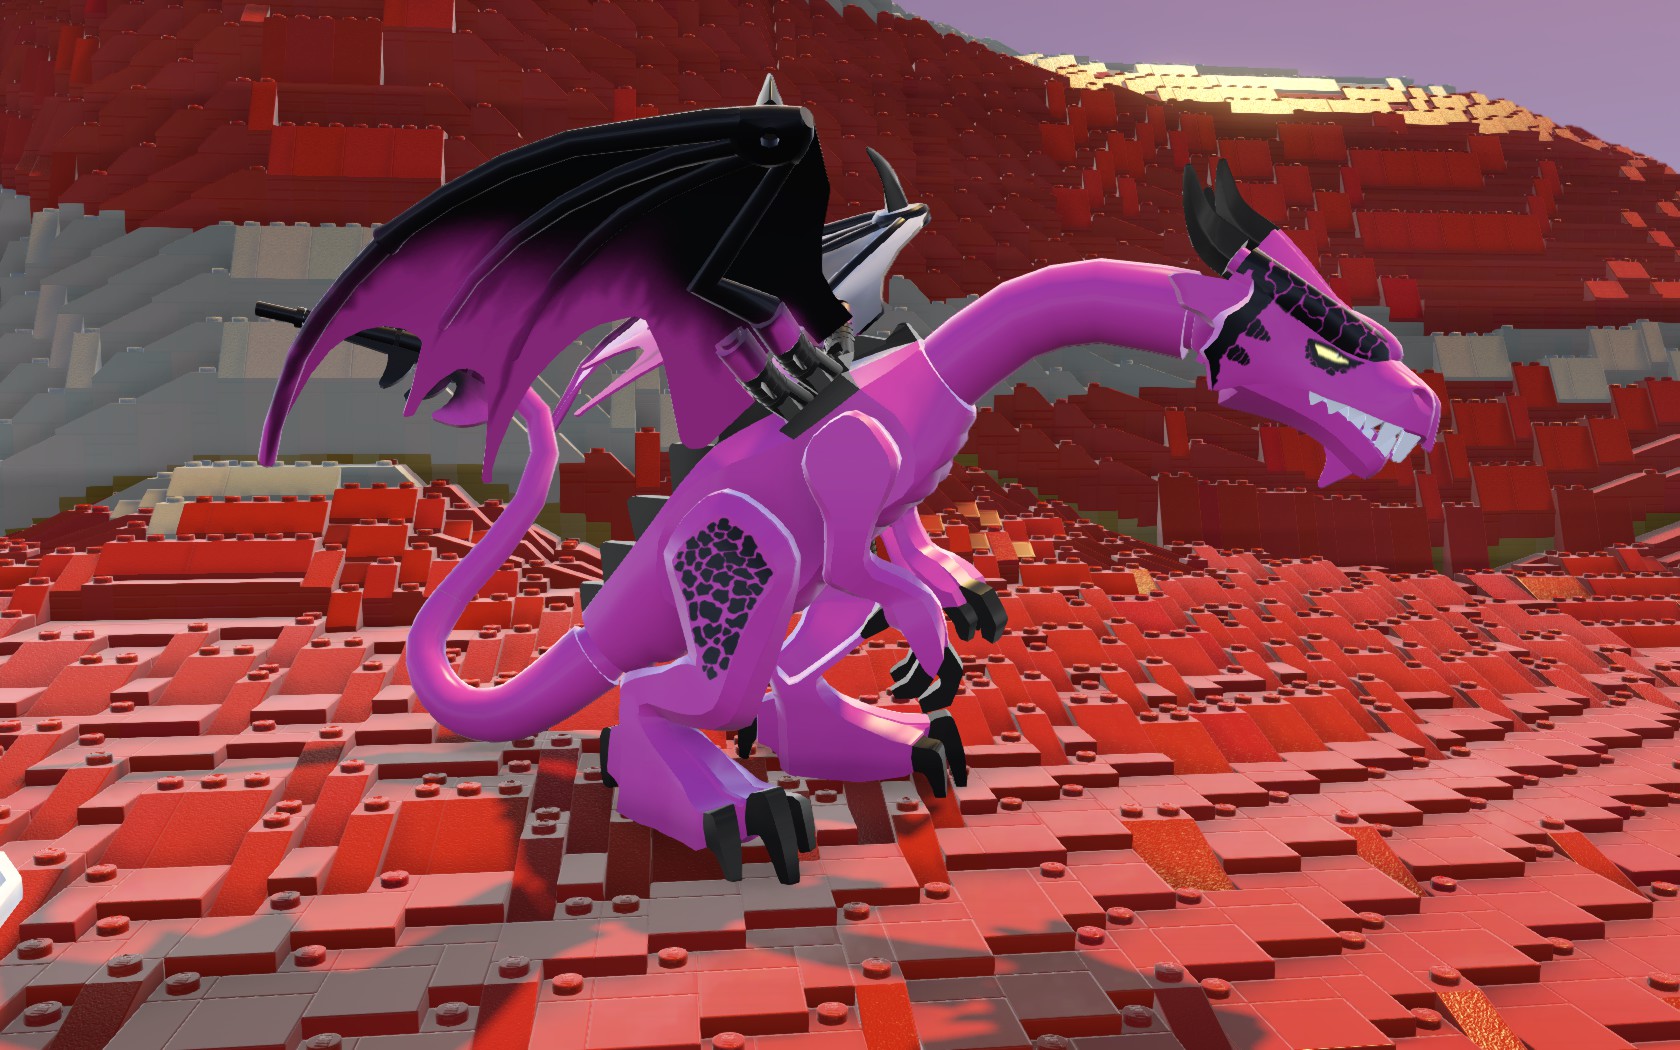 fungus forest to get dragon in lego worlds dragon wizard coordinates